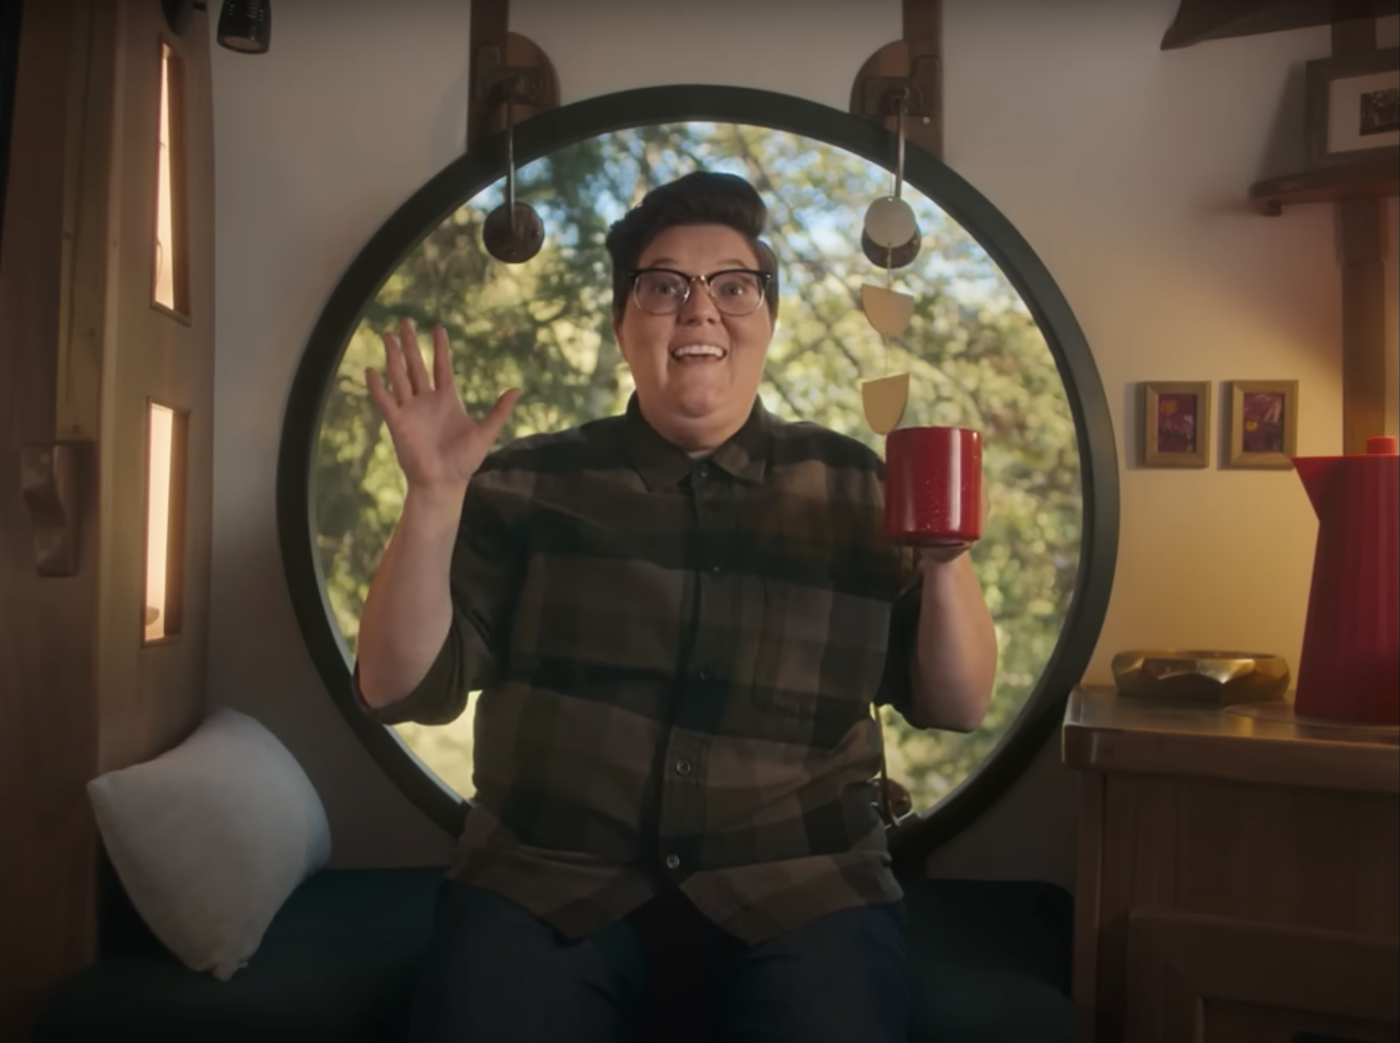 A screenshot of part of the Maple Leave video where a speaker is exclaiming in front of a circular window while holding a red coffee mug.